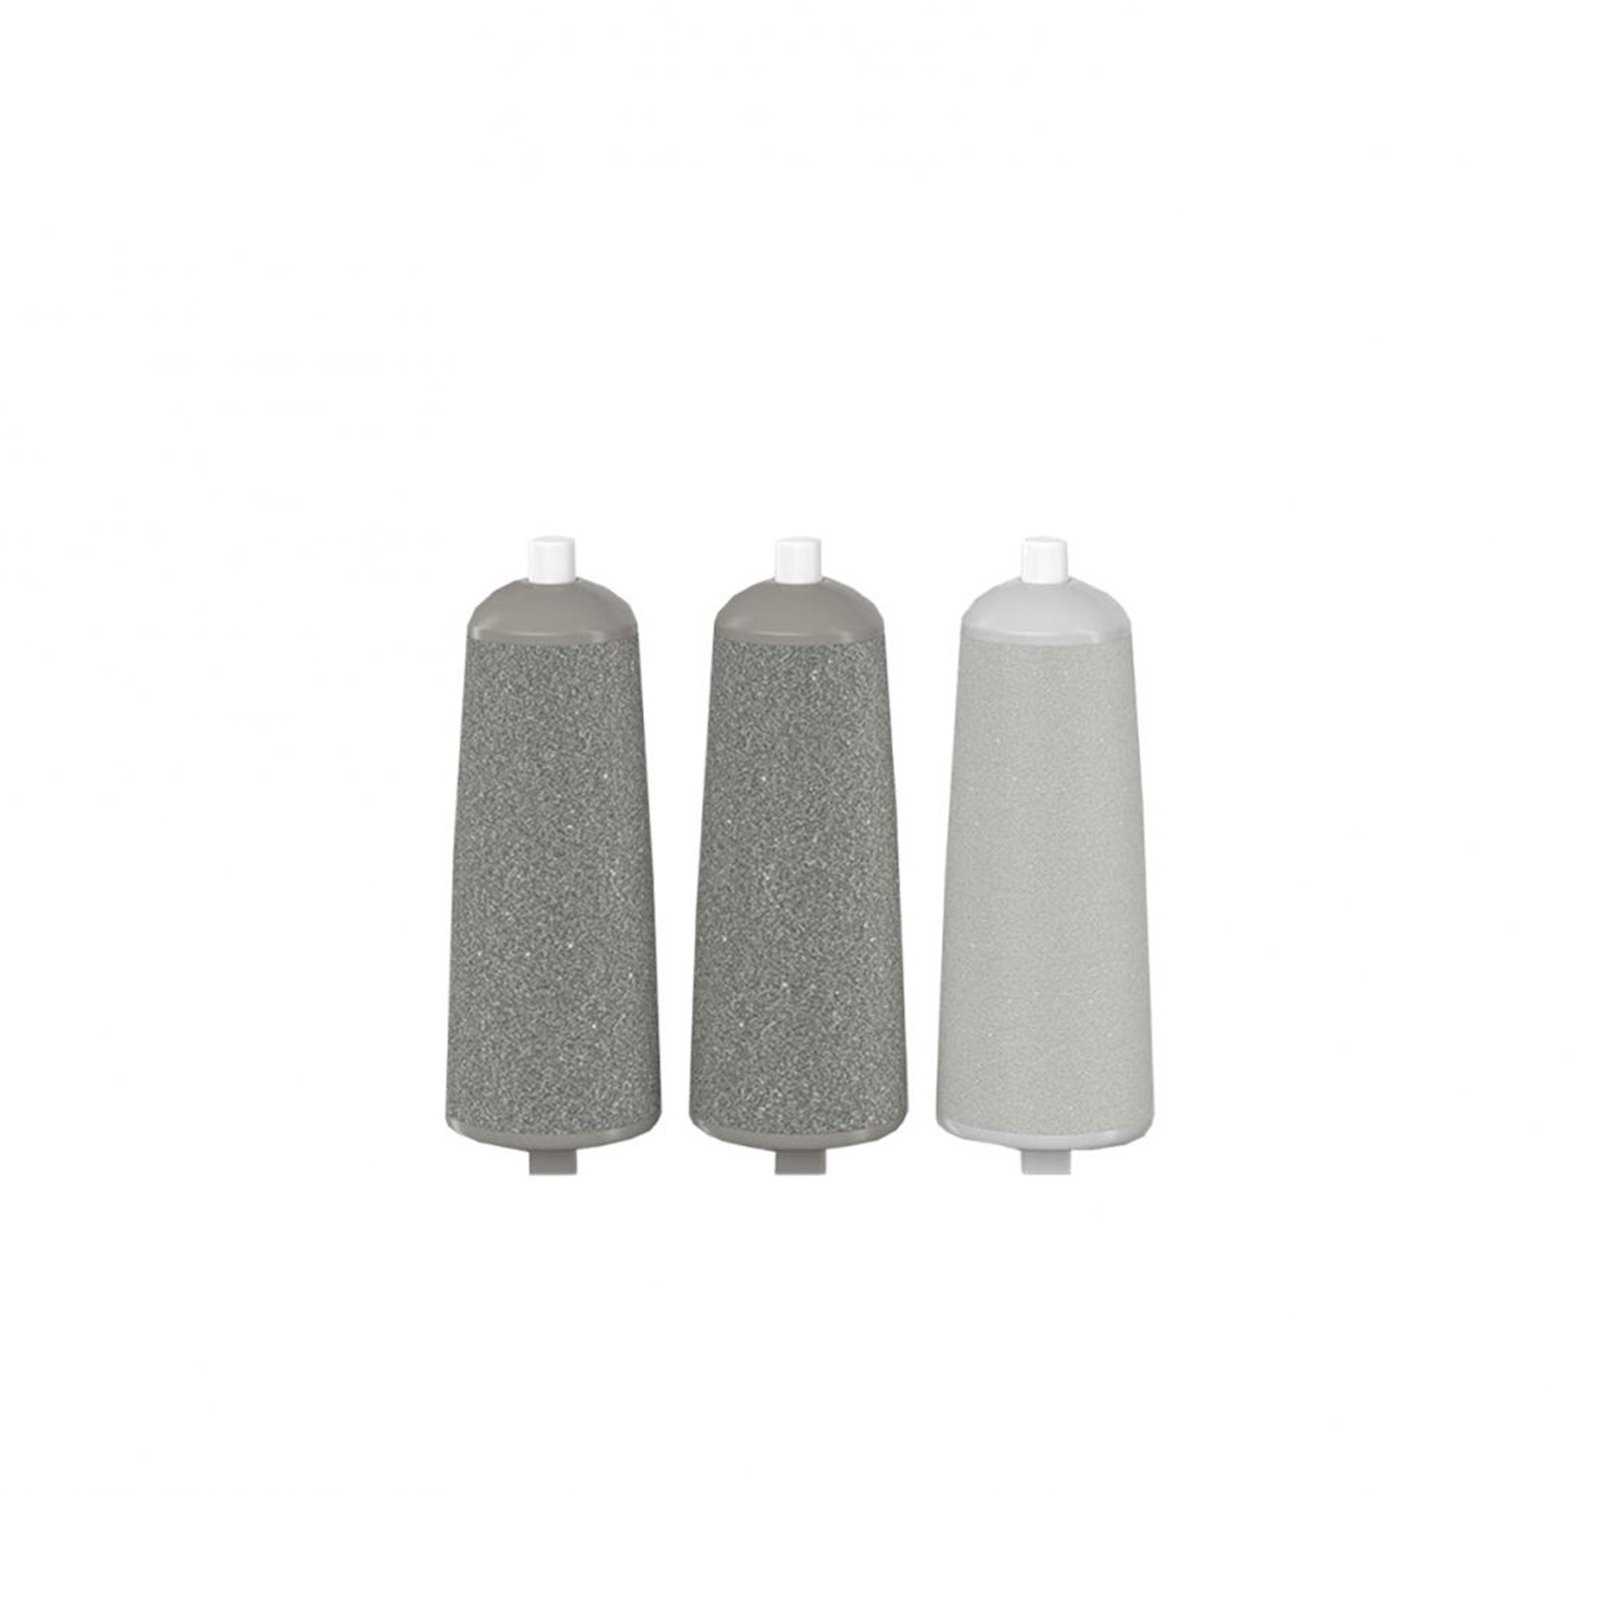 Finishing Face Flawless Pedi Replacement Heads 3-pack